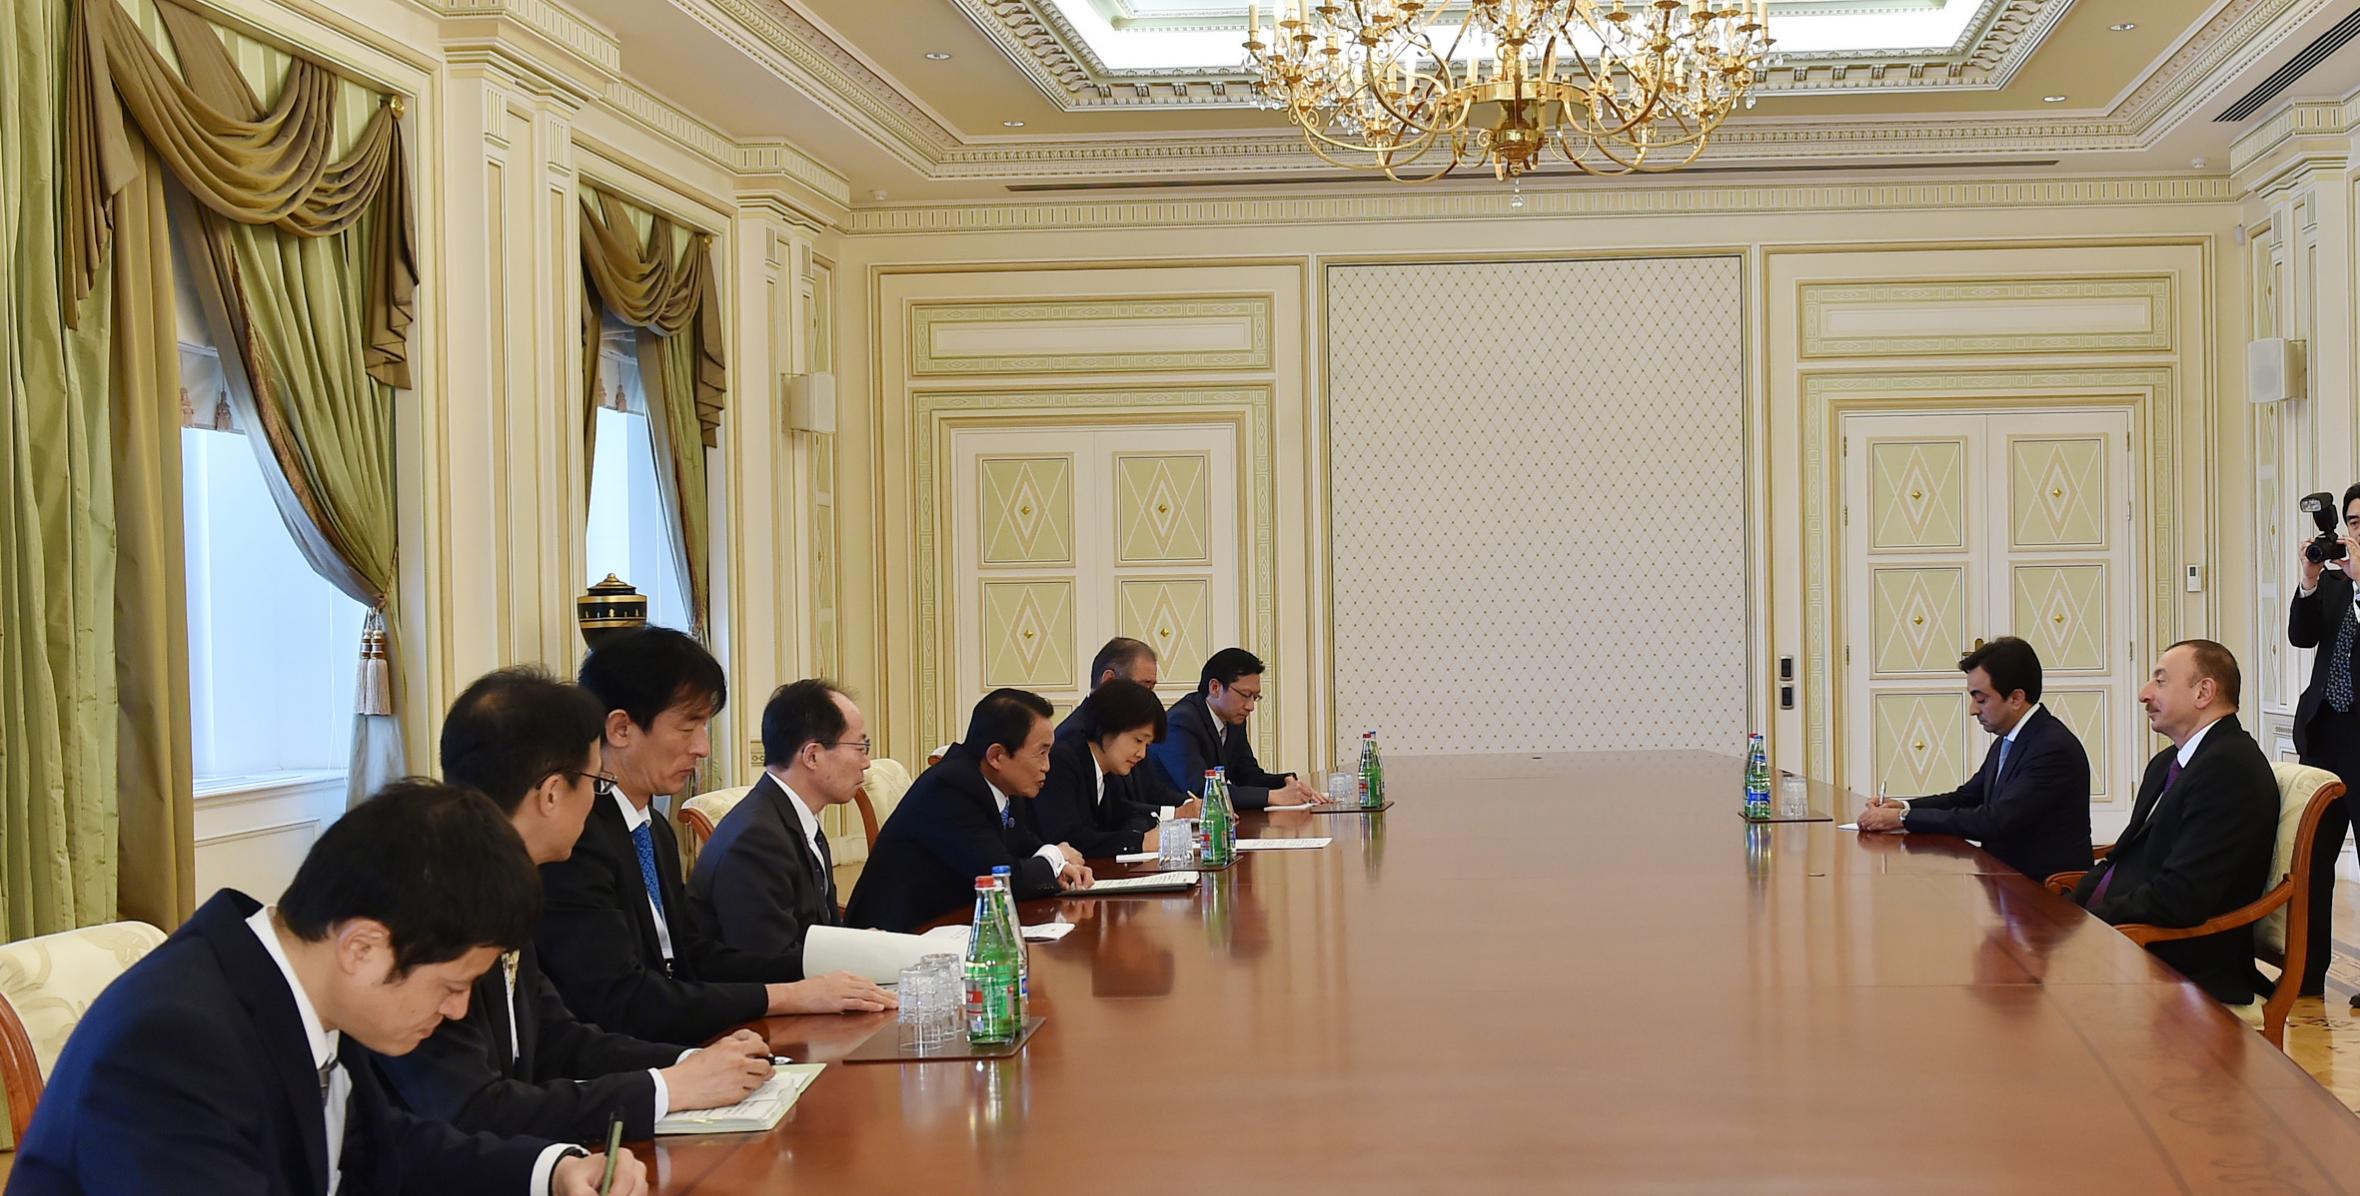 Ilham Aliyev received a delegation led by the Japanese Deputy Prime Minister